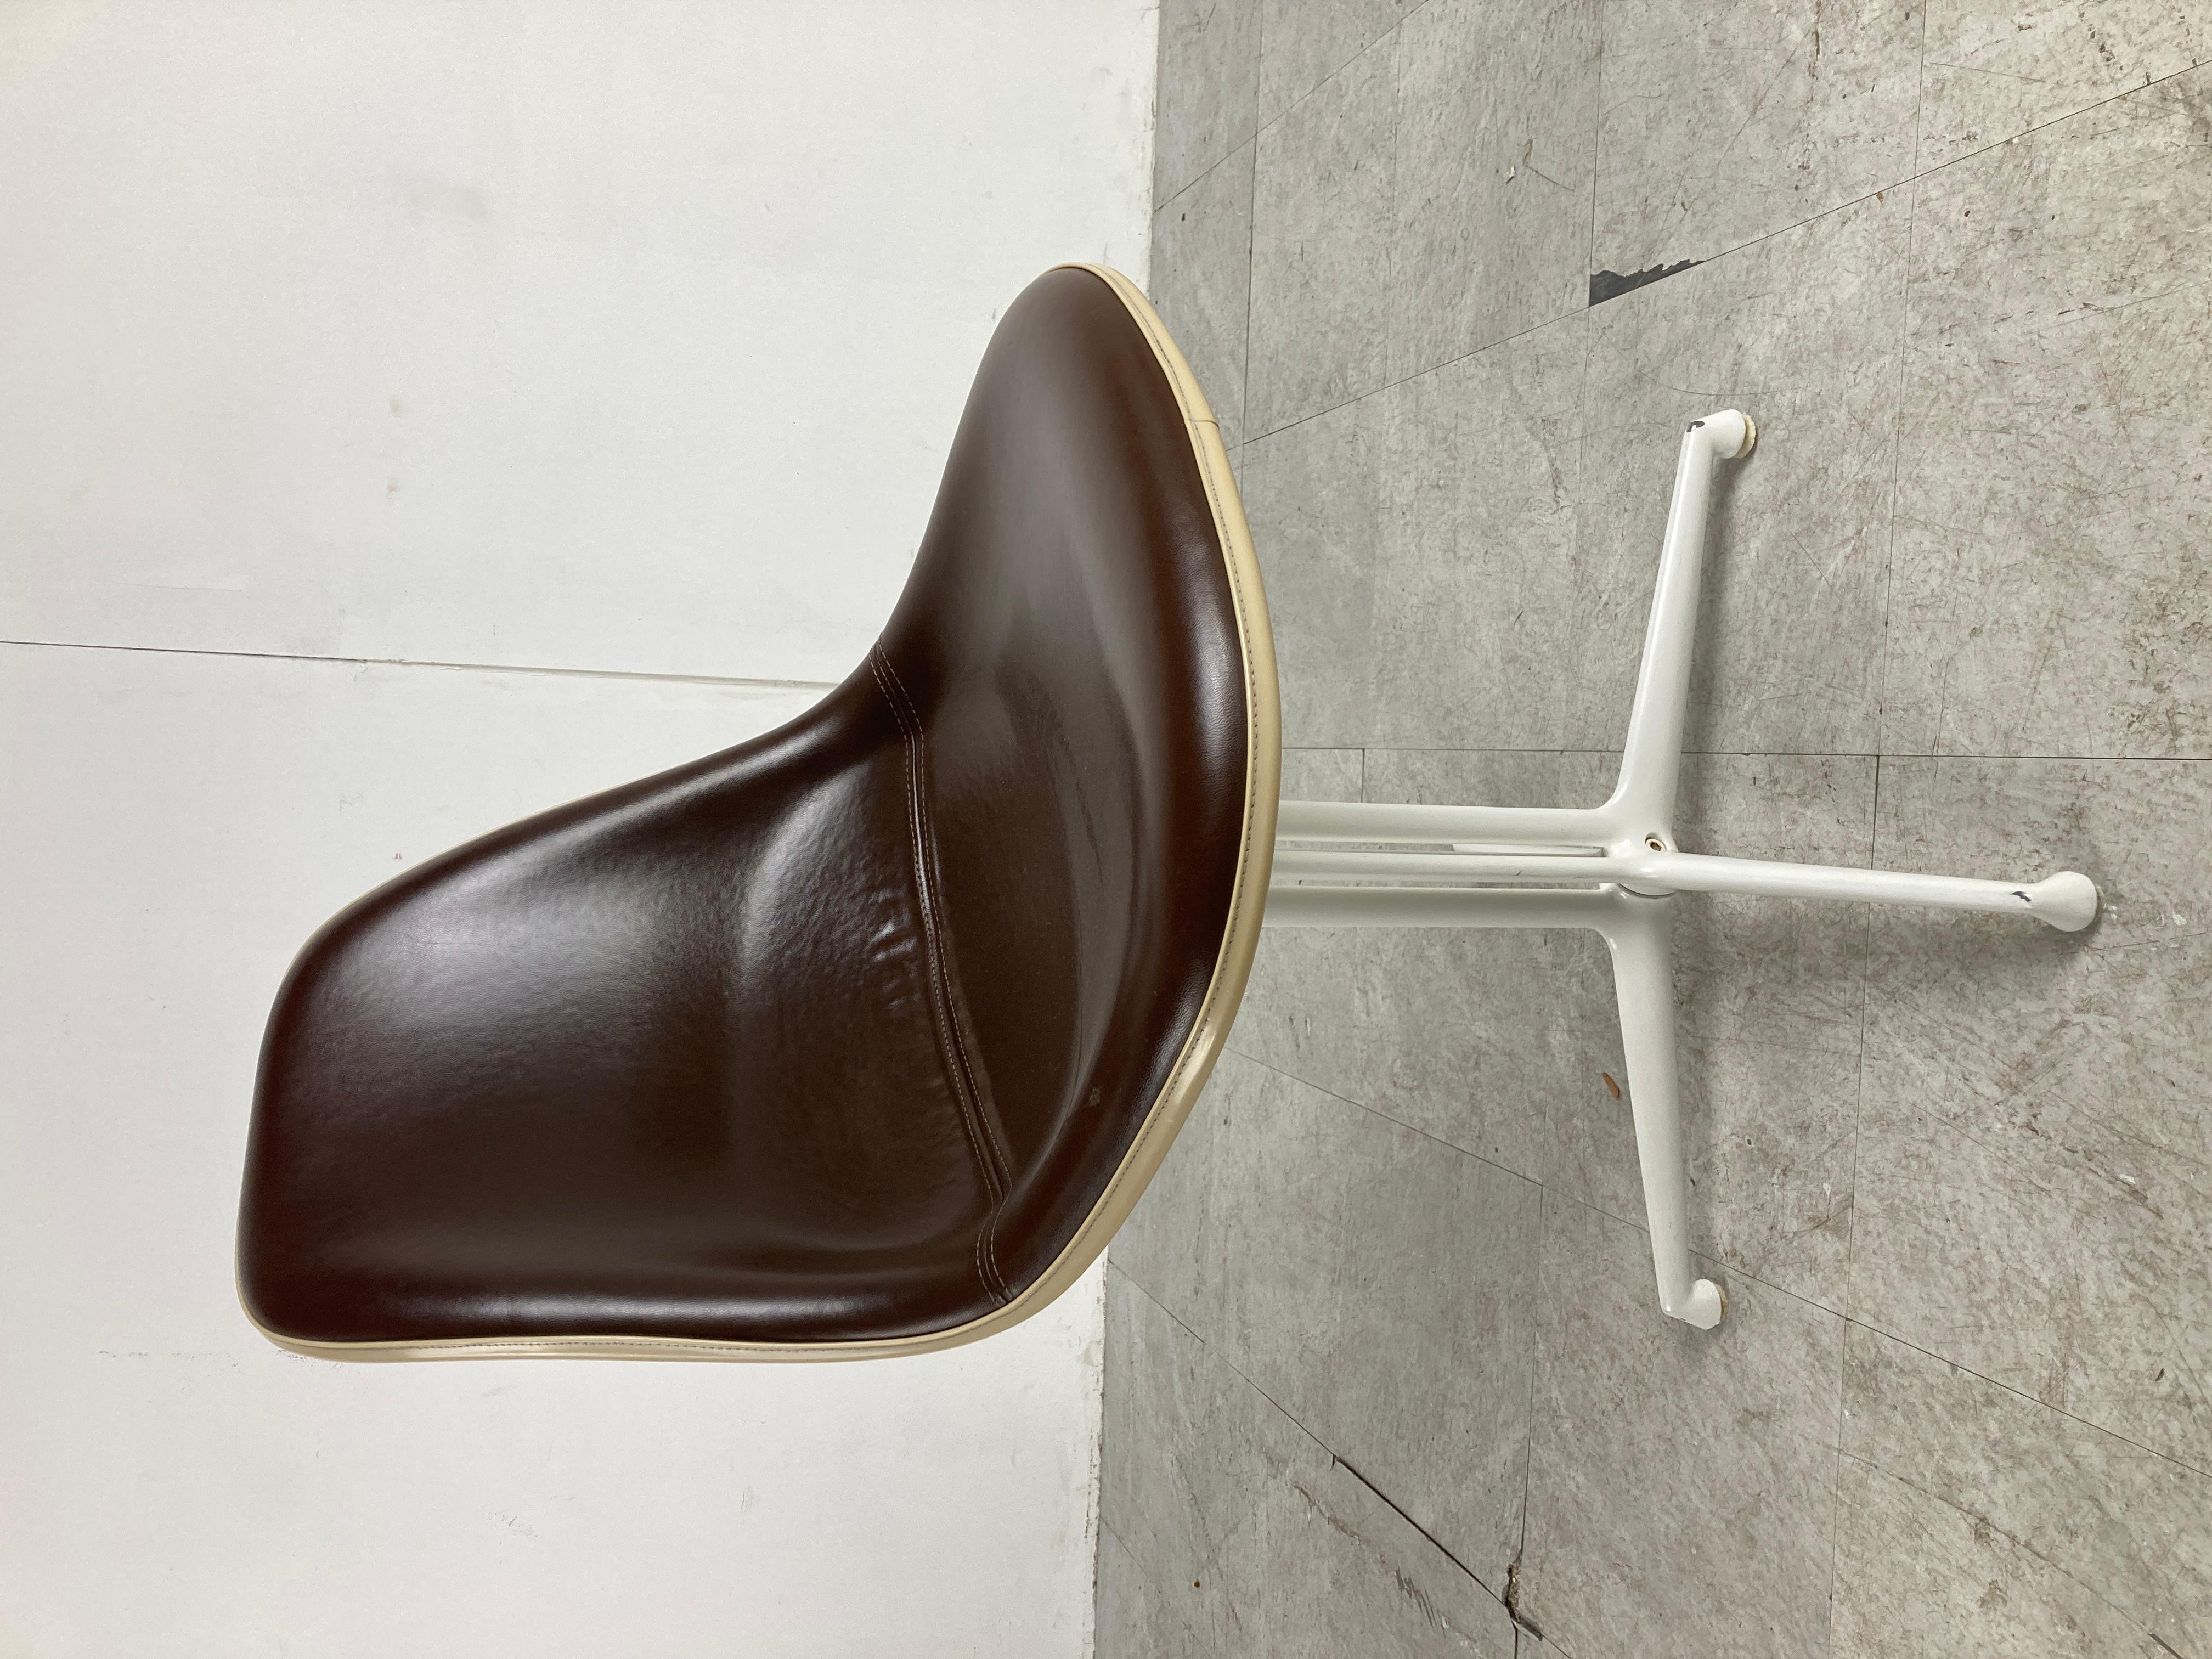 Mid century fiberglass and leatherette 'La fonda' chairs designed by Charles and Ray Eames and produced by Herman Miller.

White lacquered metal base. 

White and brown combines beautifully.

Nice set of 8 which you dont see so often.